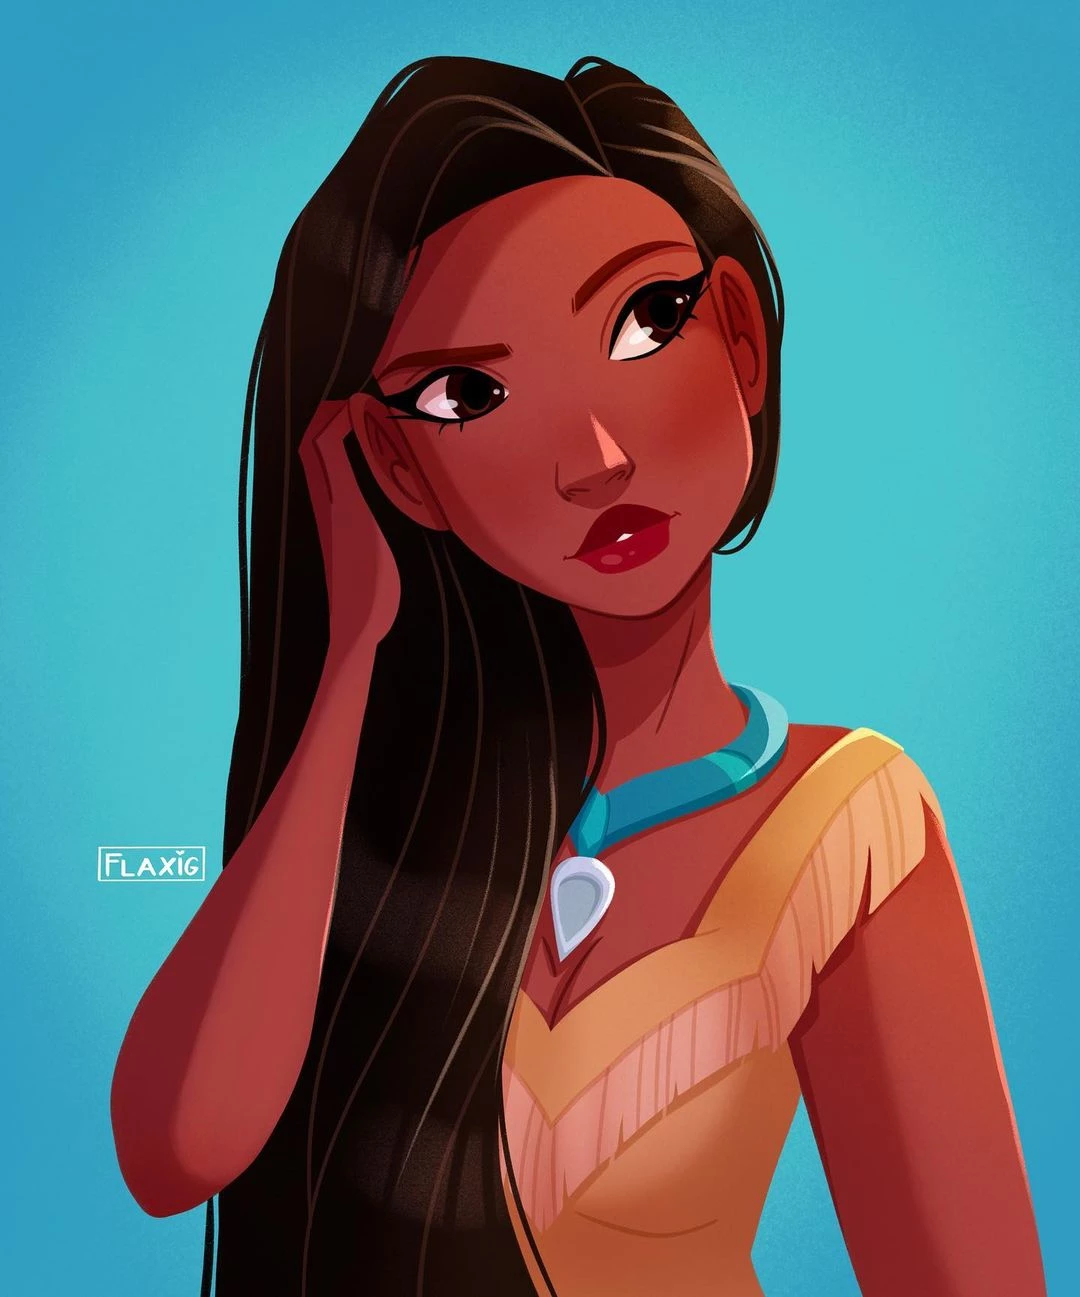 Pocahontas Playing With Her Hair Is One Of The Most Bewitching Scenes In (Pocahontas)